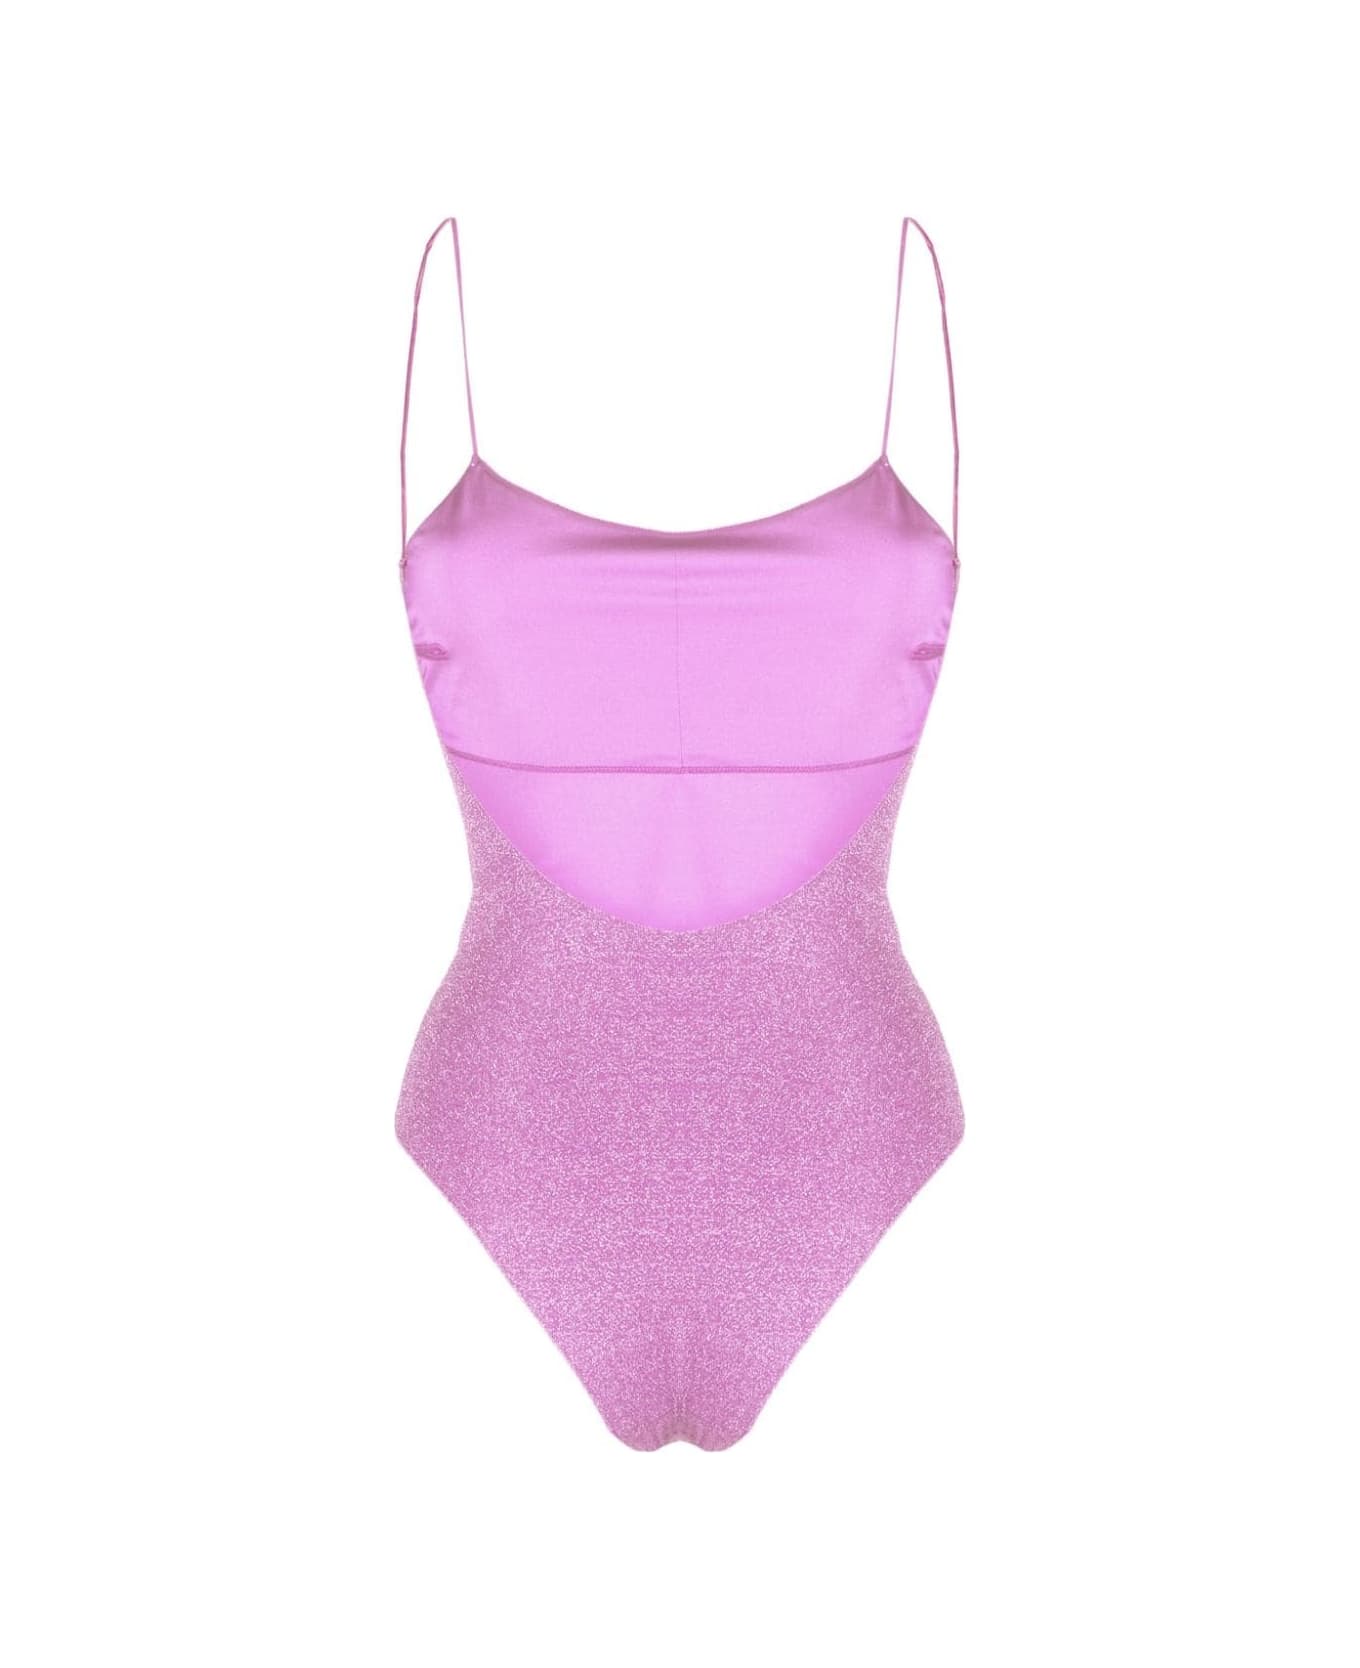 Oseree Wisteria Lumiere Maillot One-piece Swimsuit - Purple ワンピース